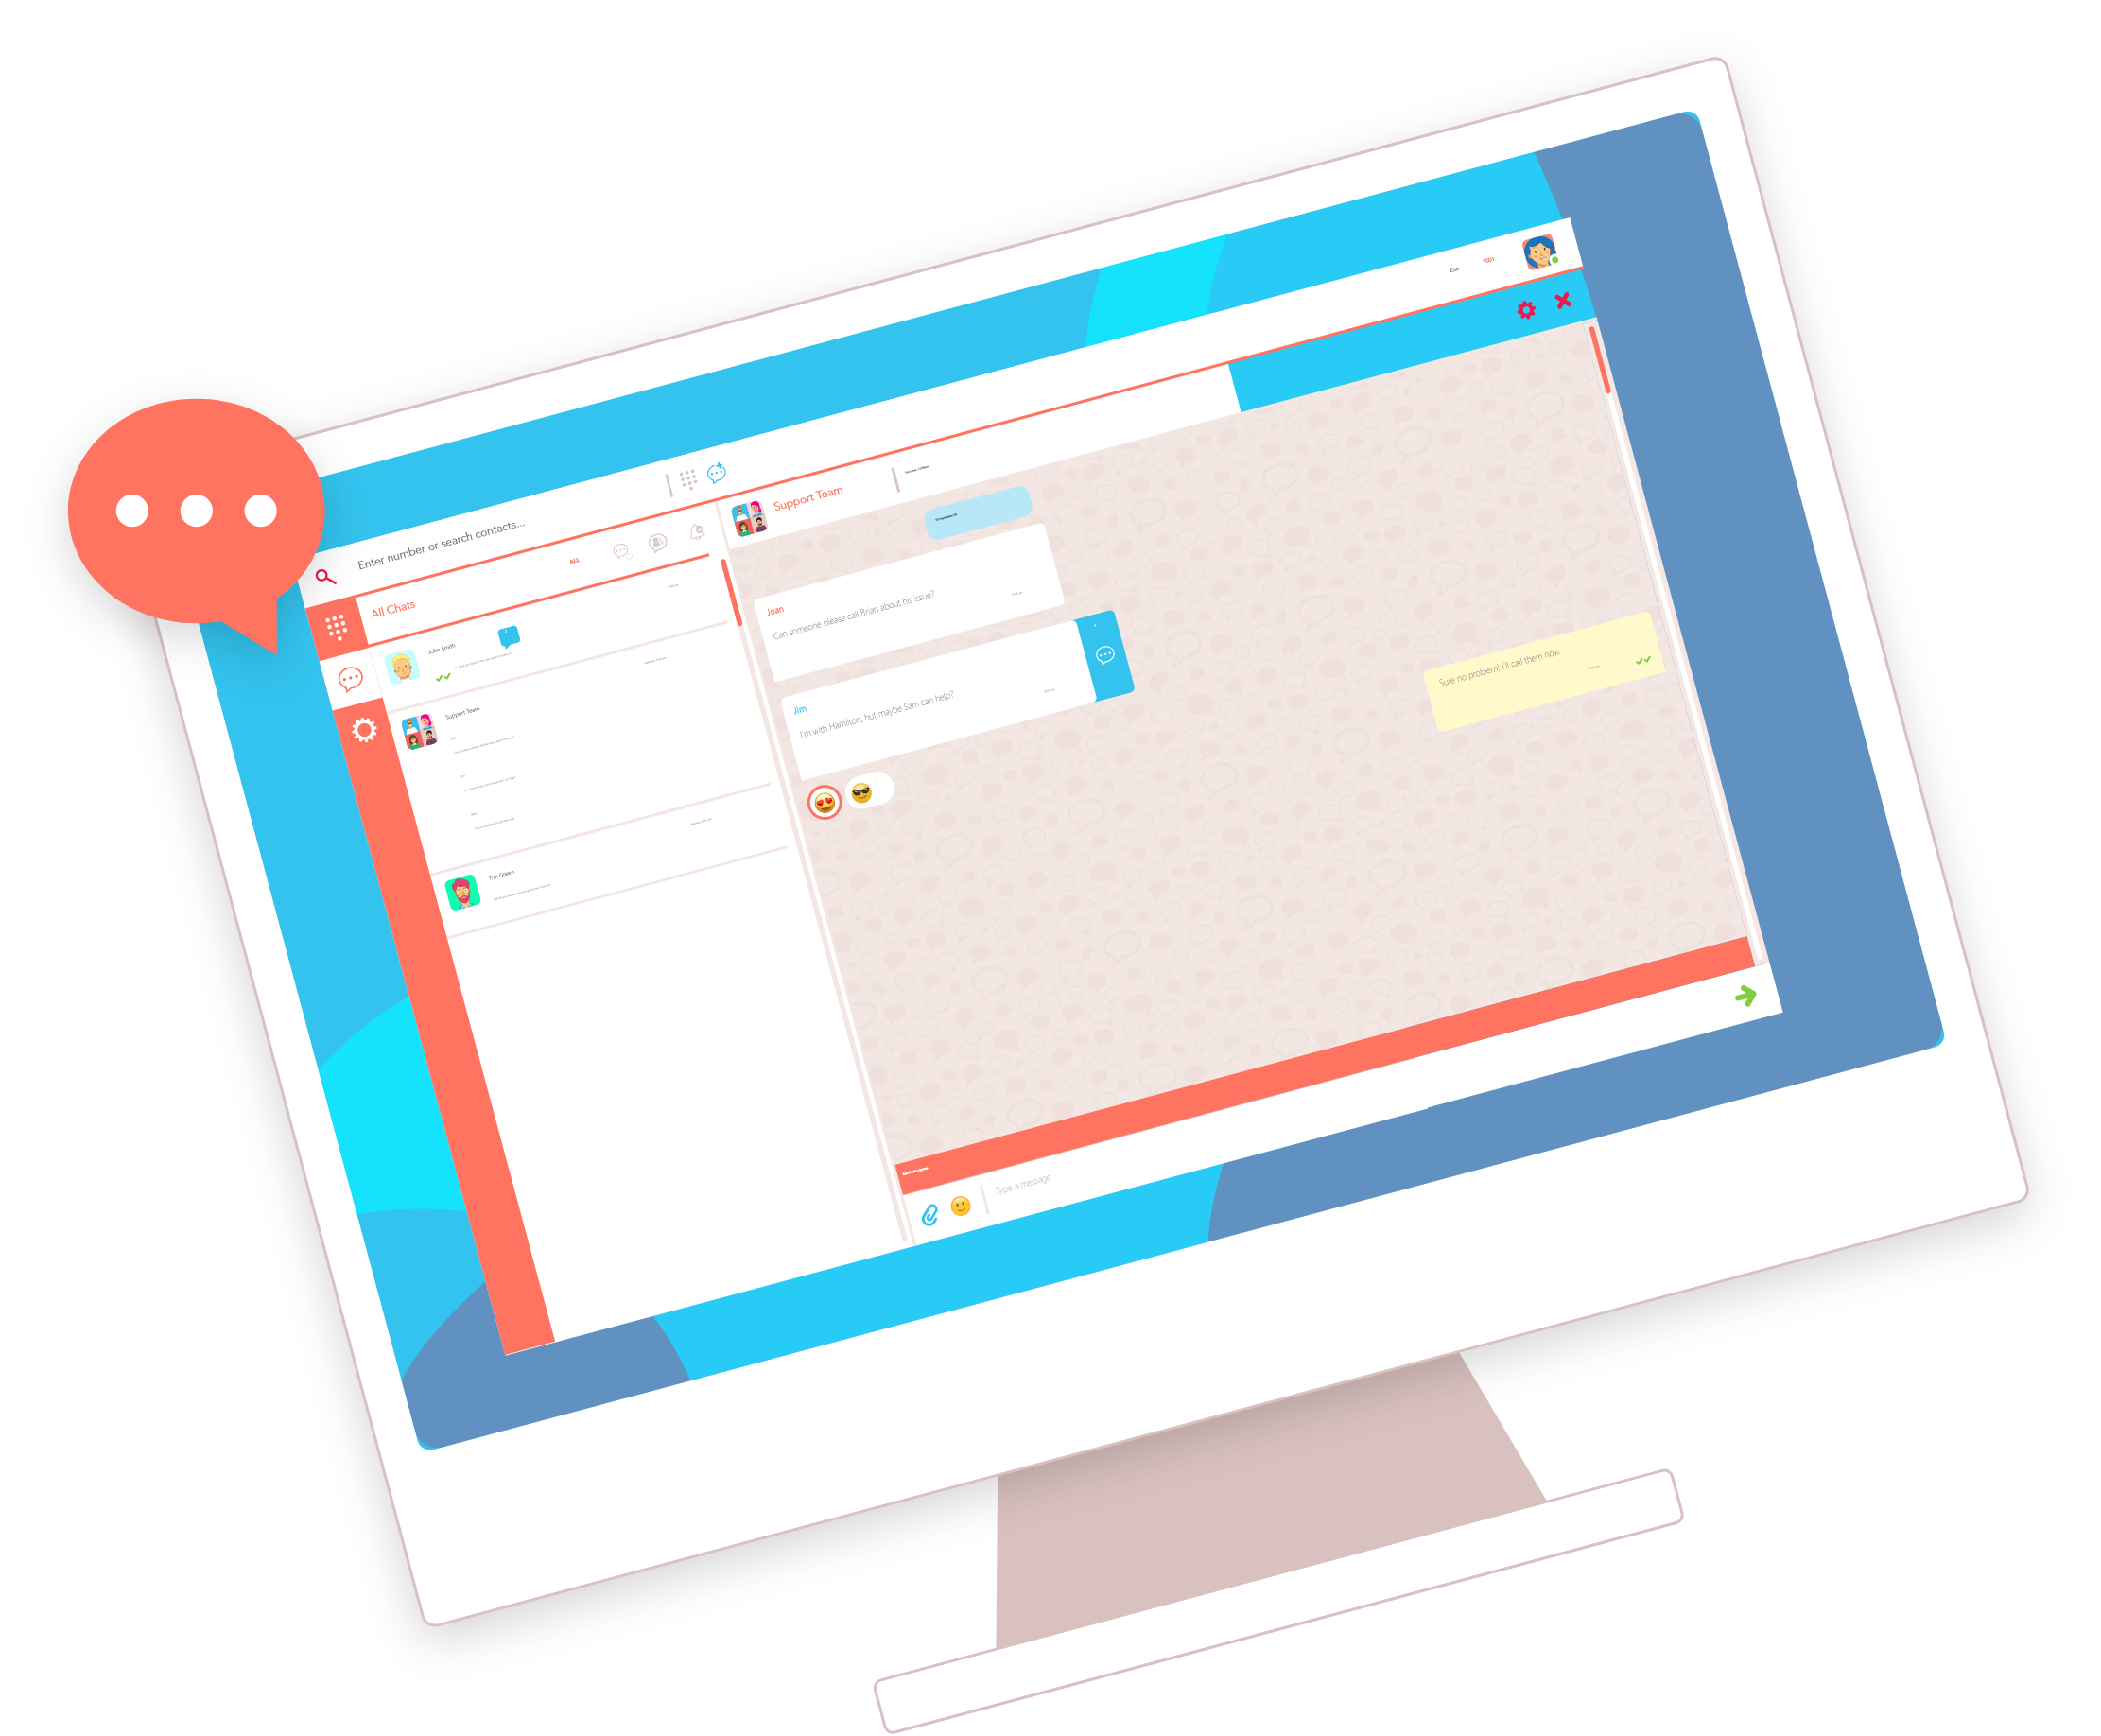 A business phone system and messaging in a desktop app